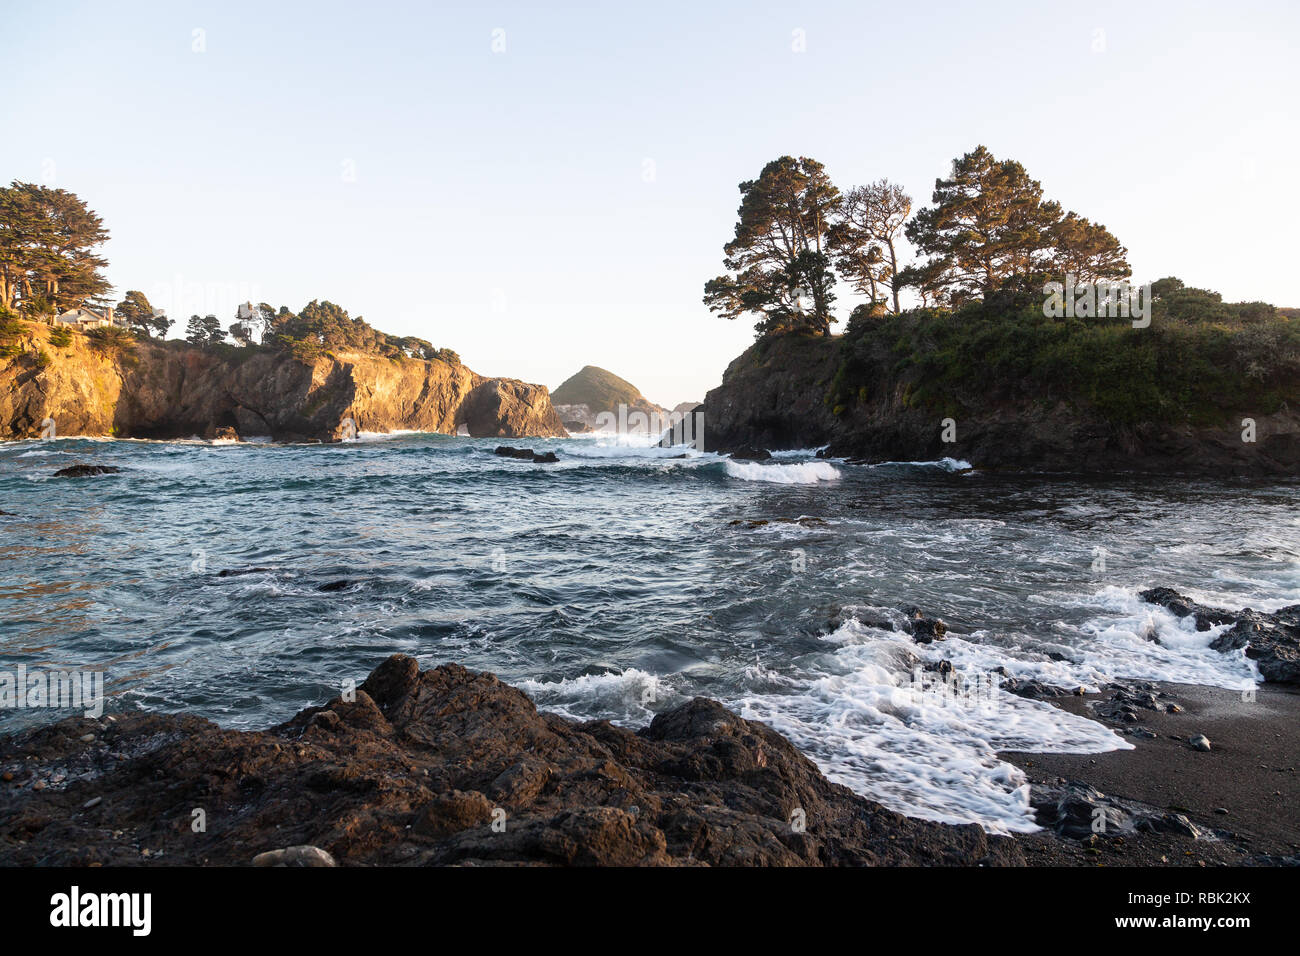 A quiet evening moment on the coast in Mendocino County before sunset. Stock Photo